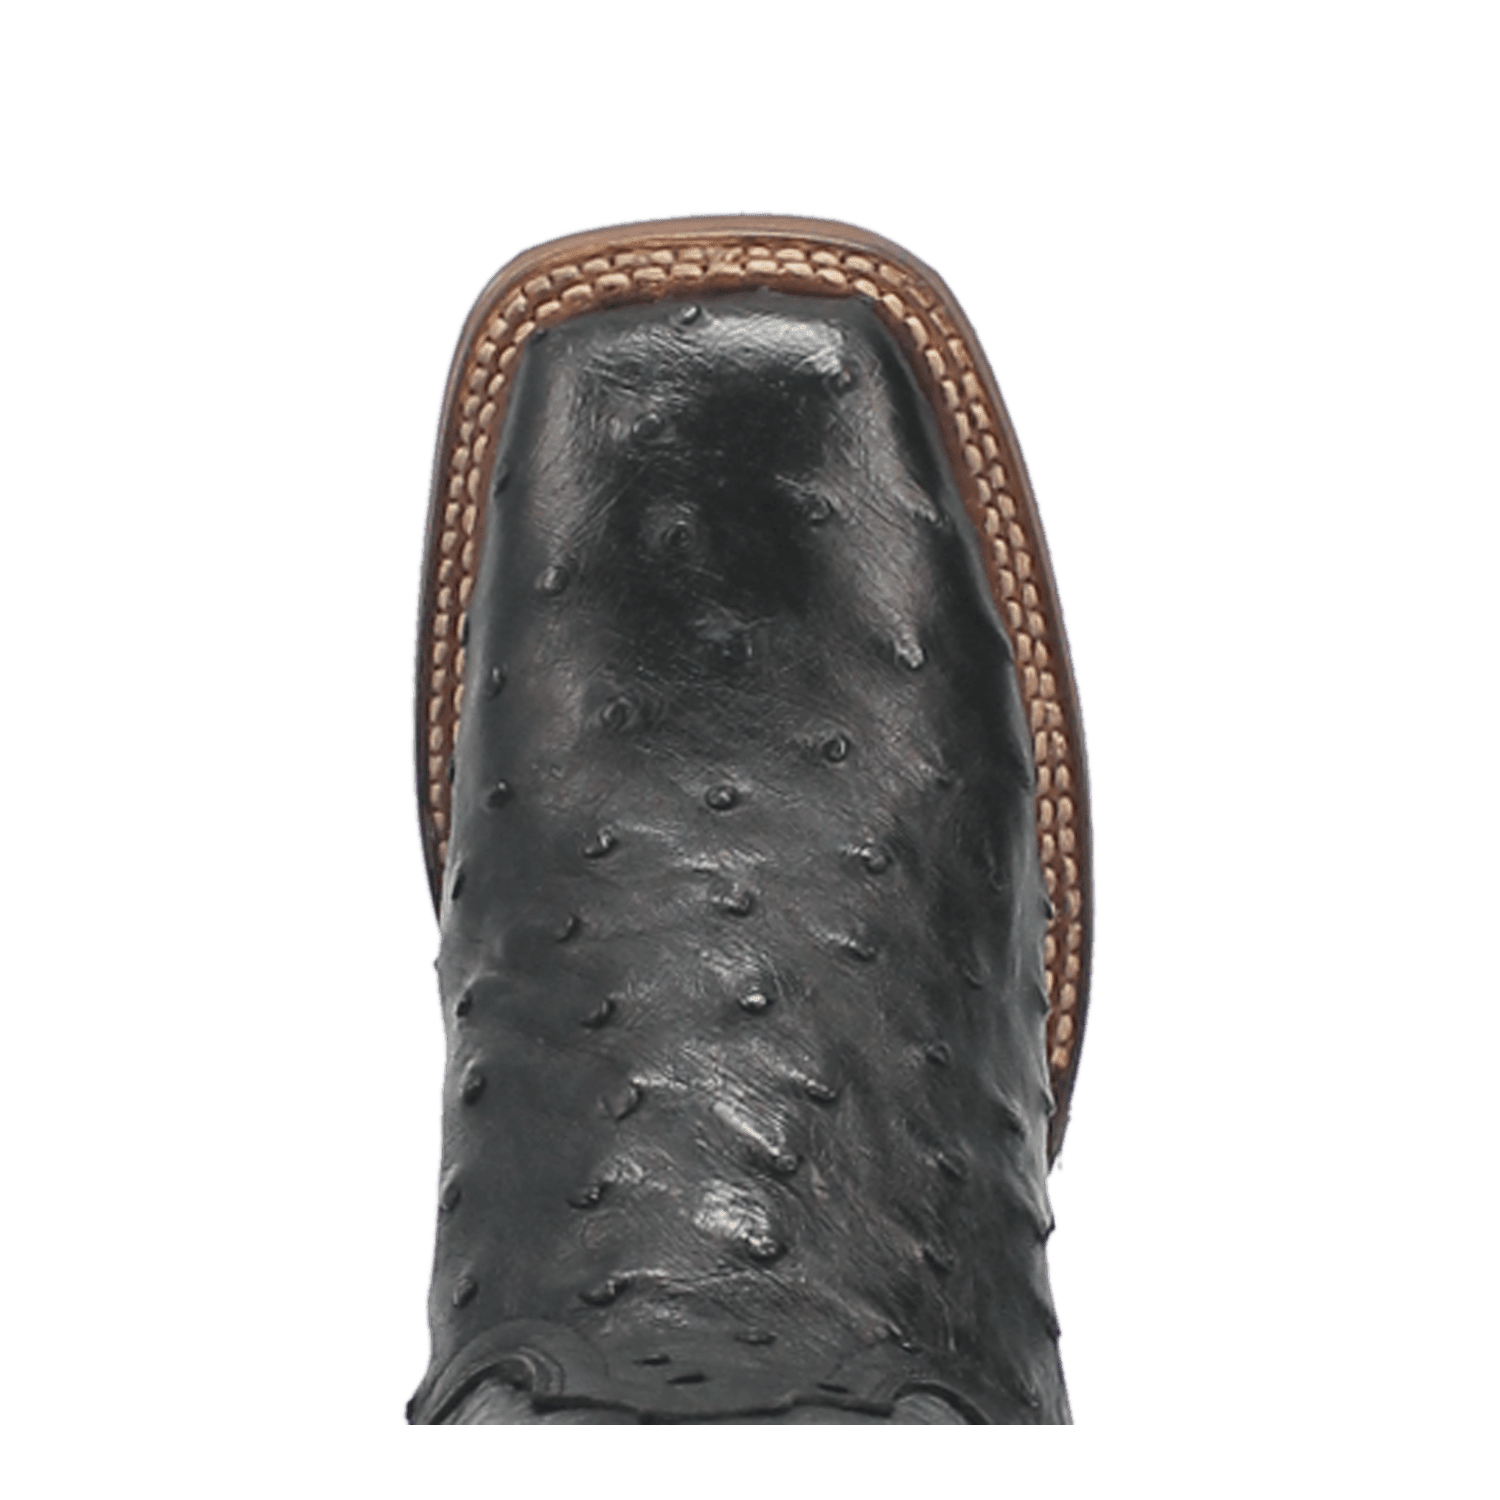 KYLO FULL QUILL OSTRICH BOOT Image